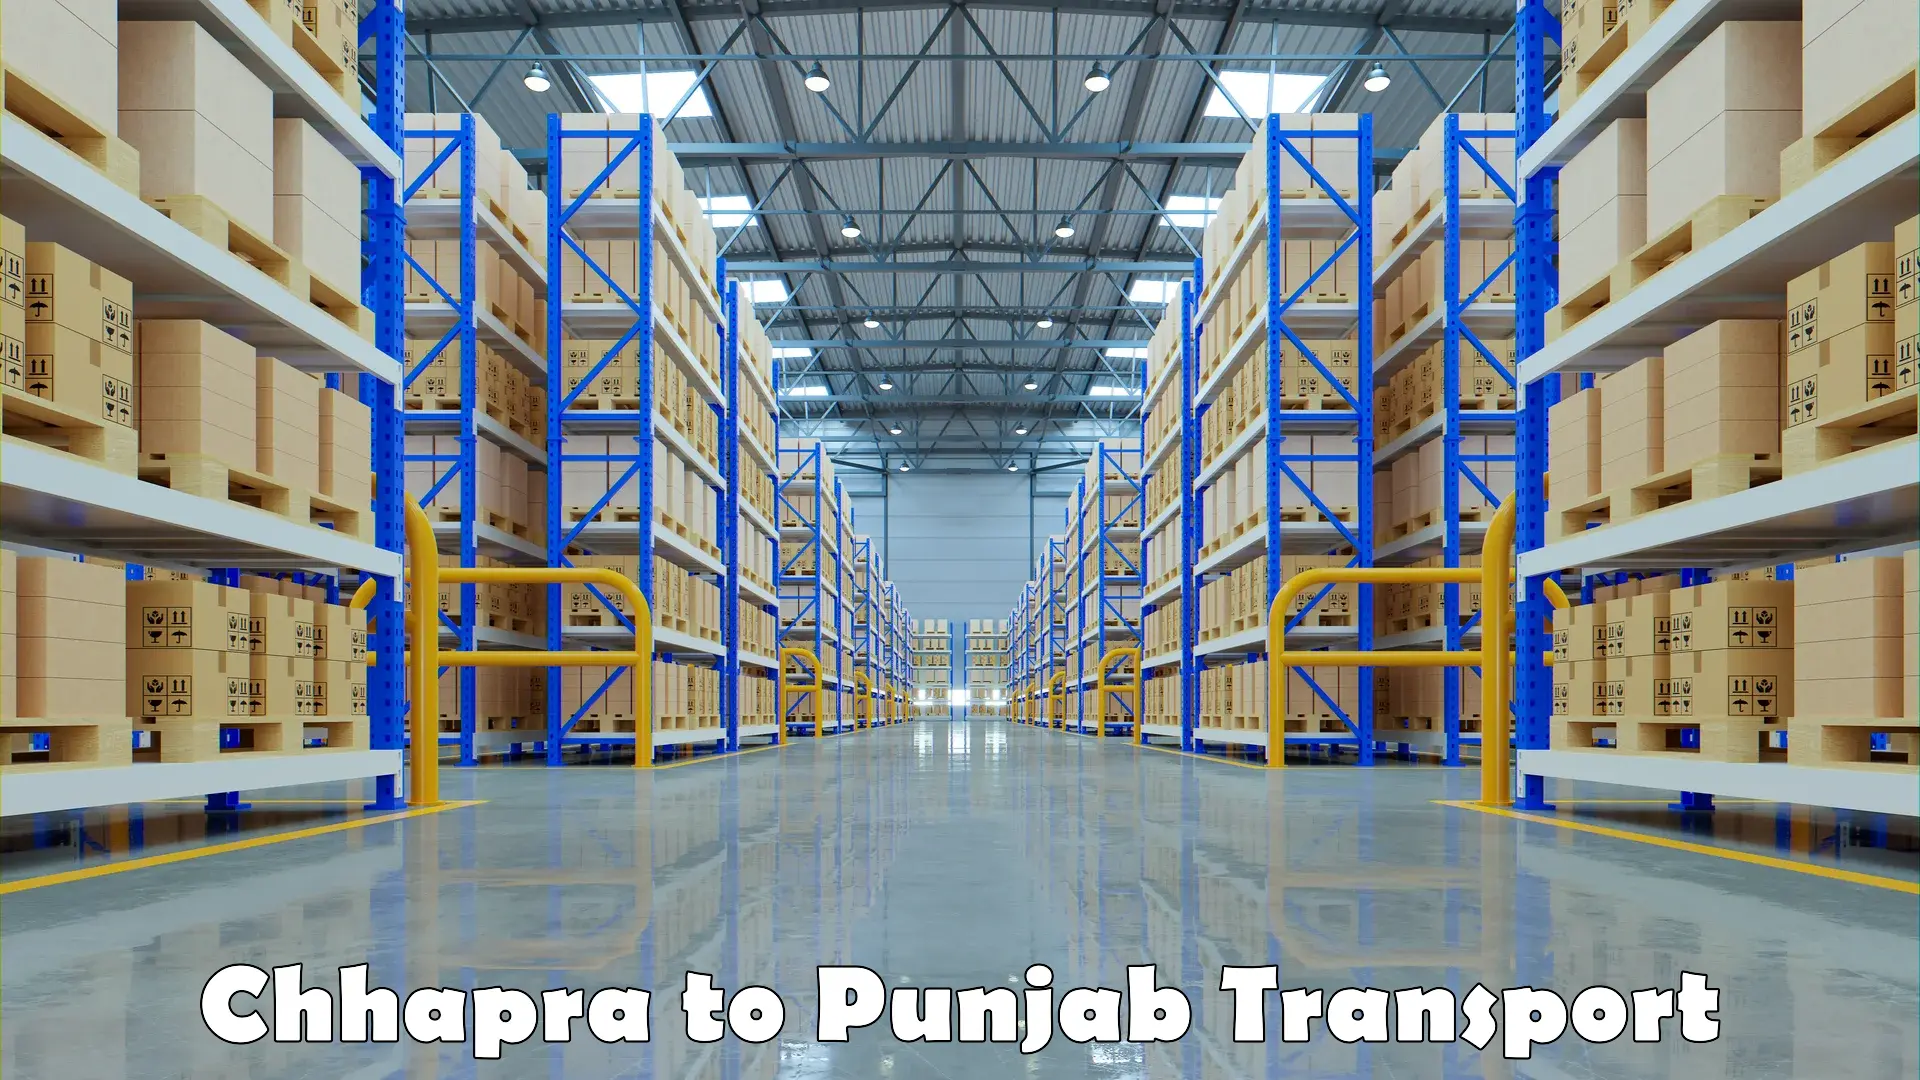 Express transport services Chhapra to Bagha Purana